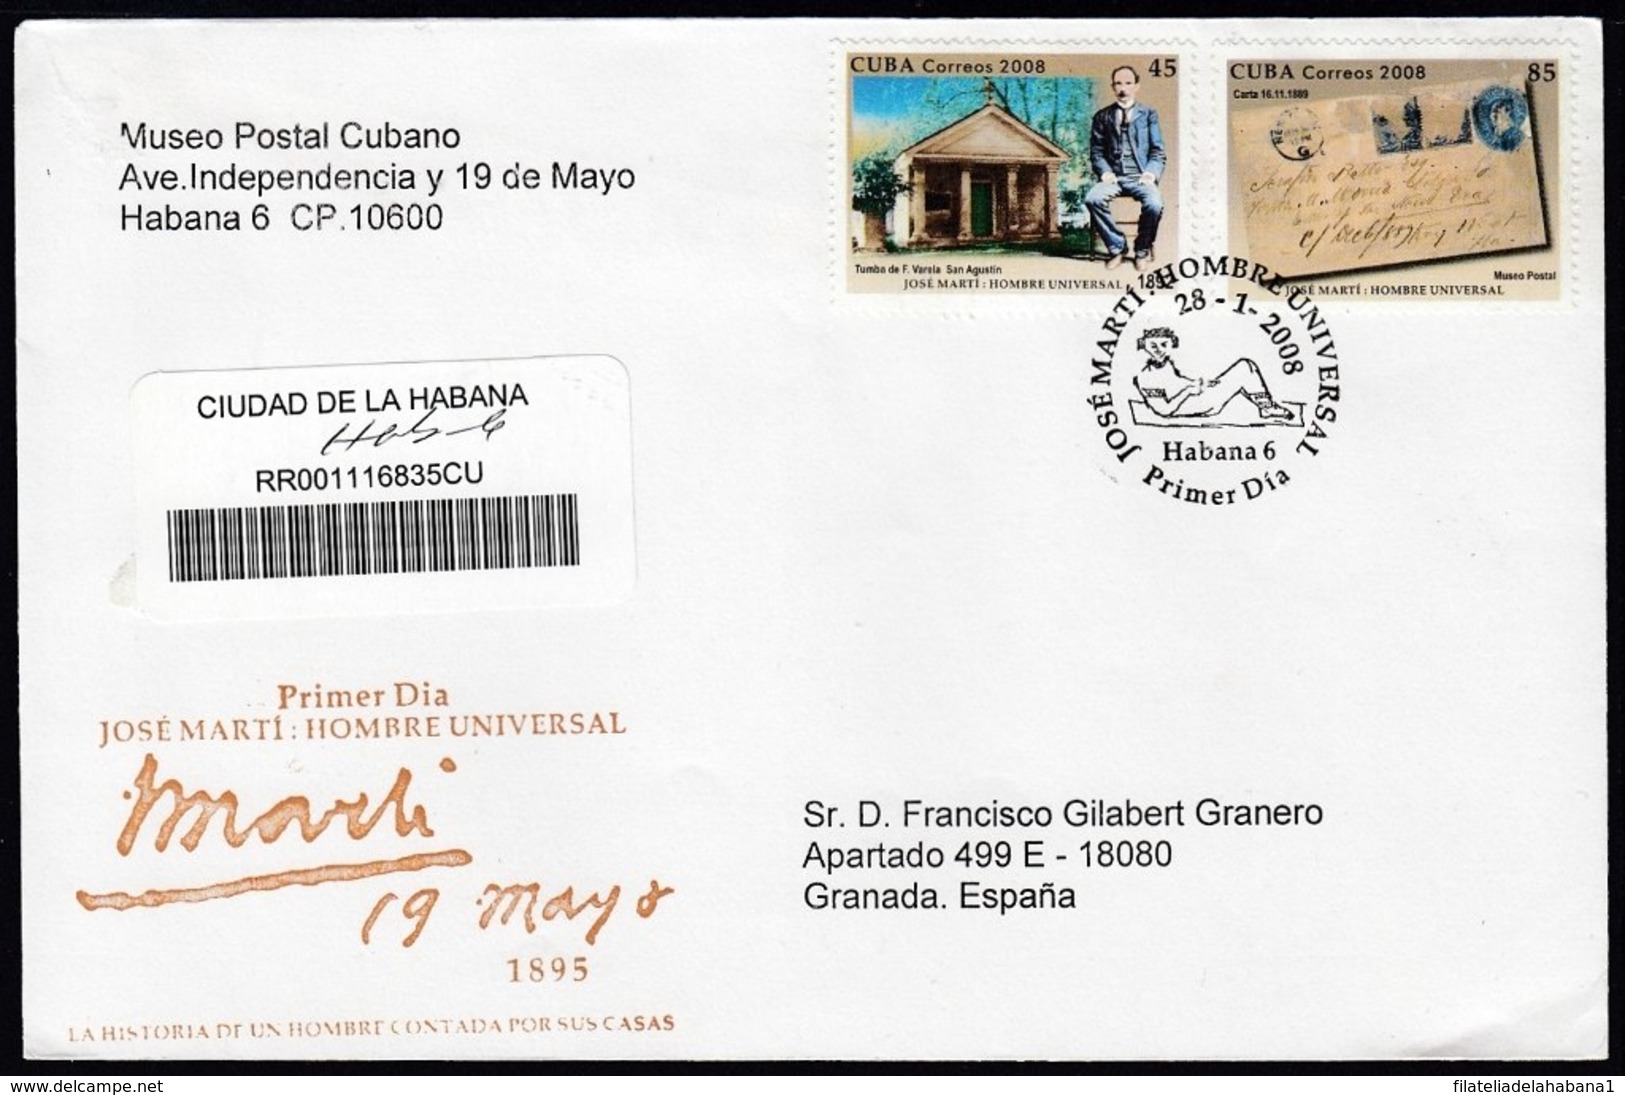 2008-FDC-39 CUBA FDC 2008. REGISTERED COVER TO SPAIN. JOSE MARTI, HOMBRE UNIVERSAL, INDEPENDENCE WAR. - FDC